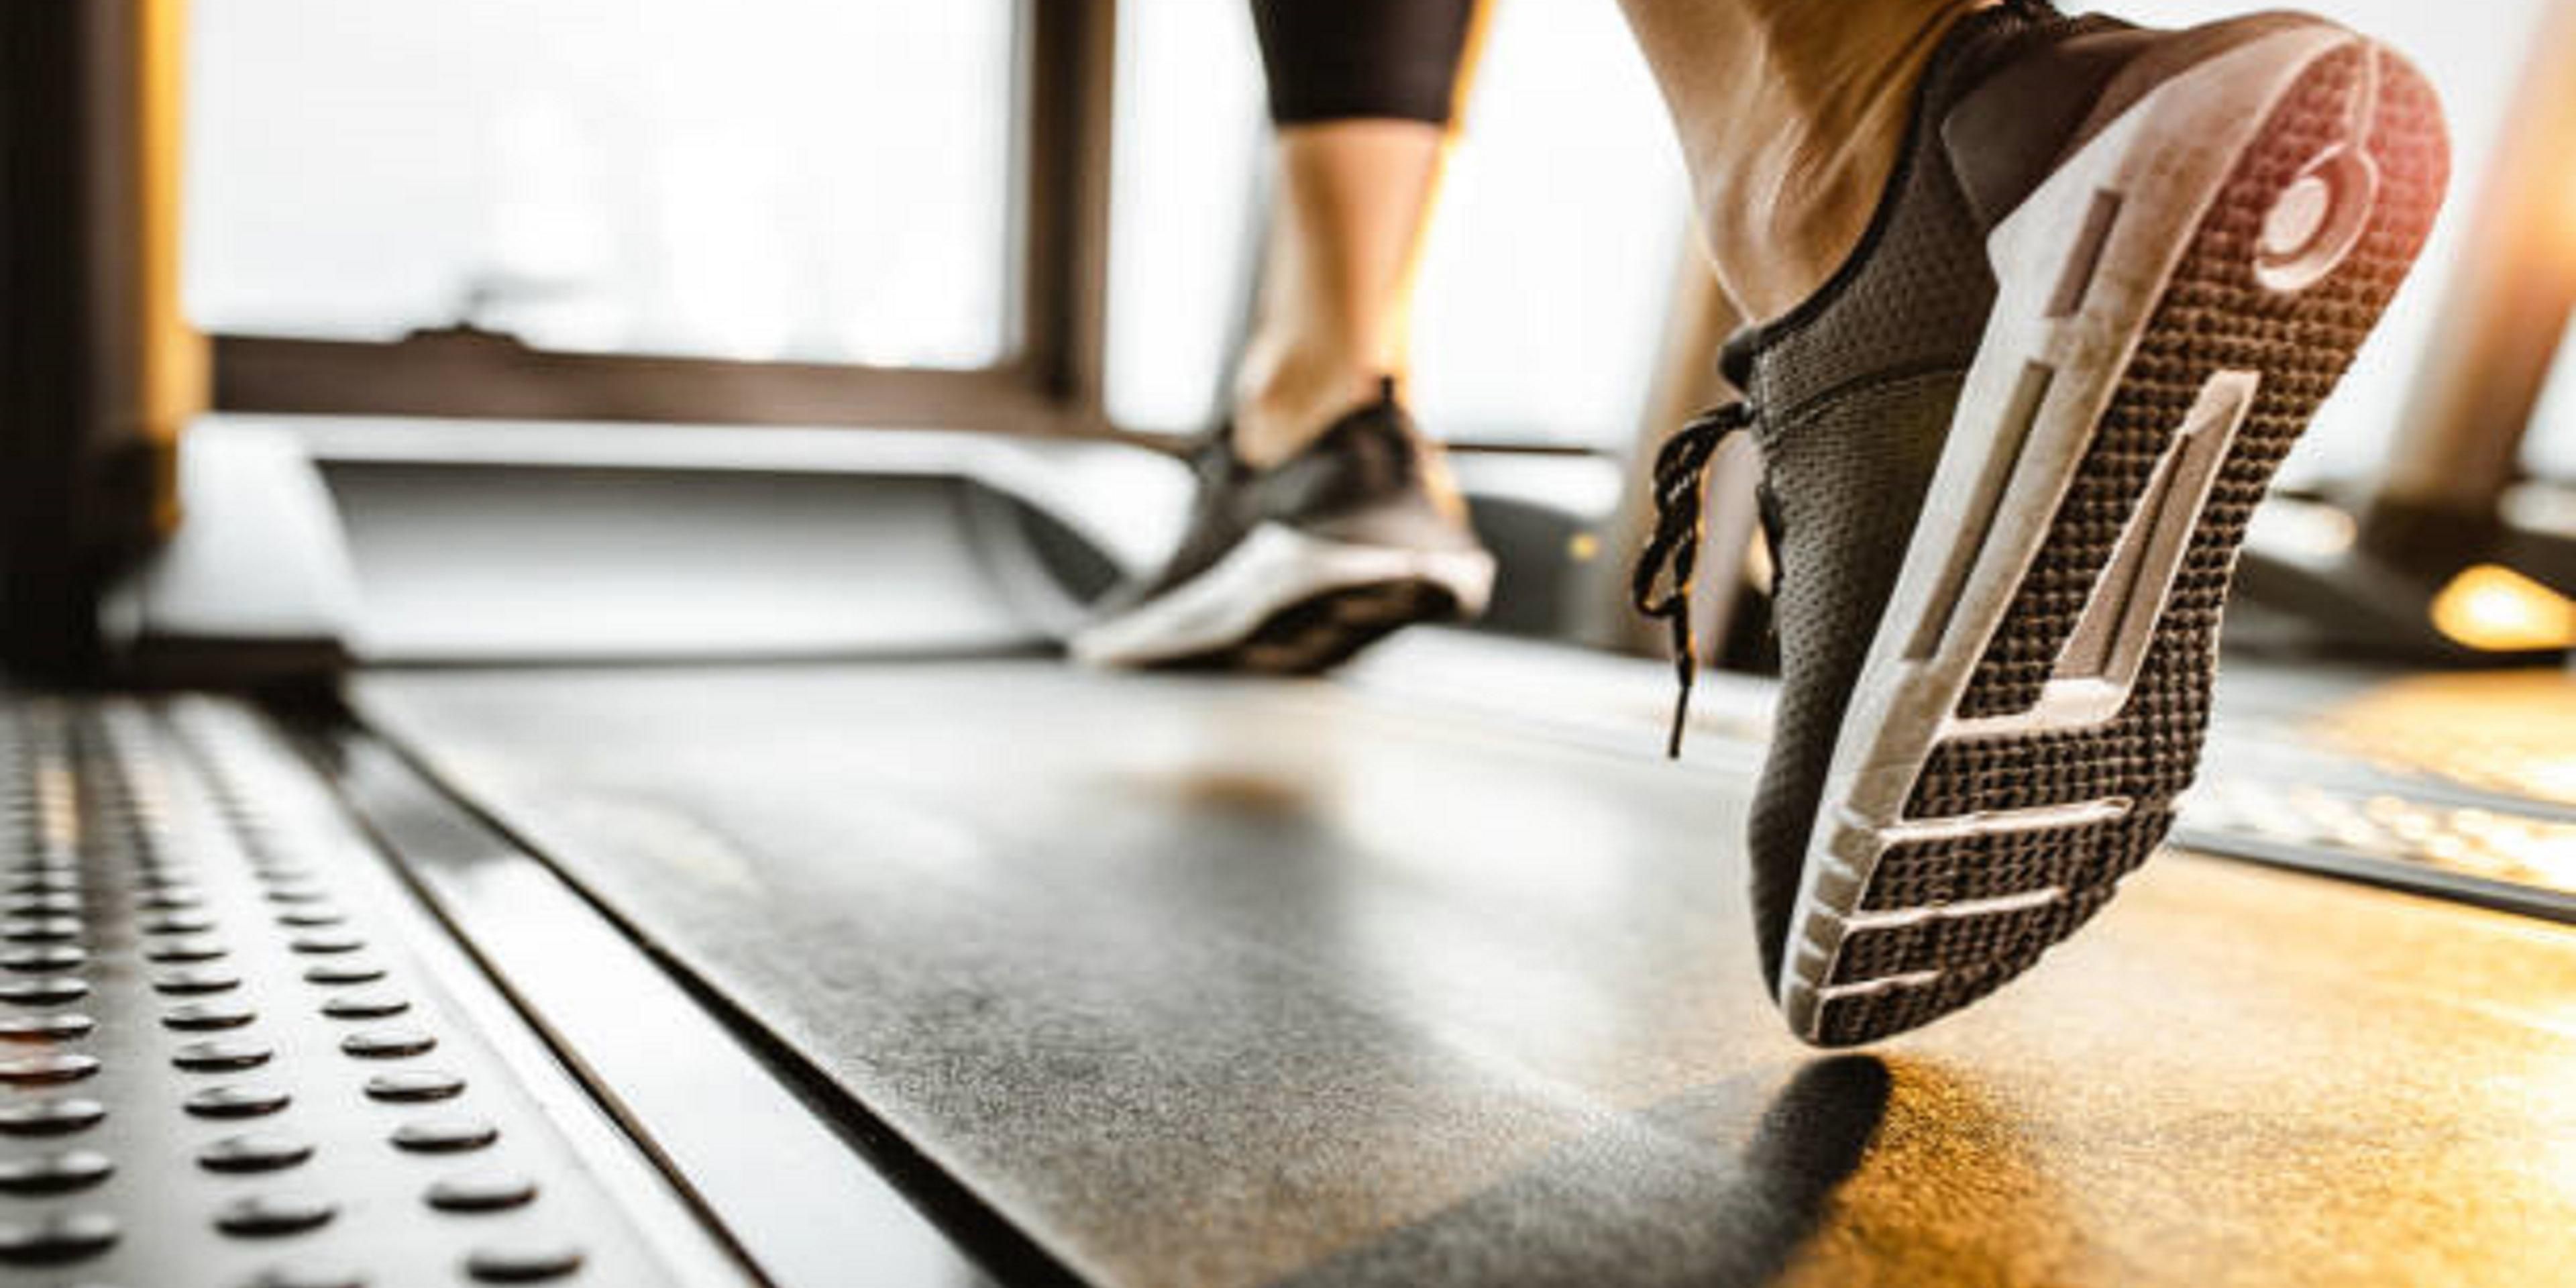 Get your sweat on in our complimentary, fully equipped Fitness Center with  two treadmills, one elliptical, yoga mats, medicine weighted balls, and a stationary bike. Open 24 hours.